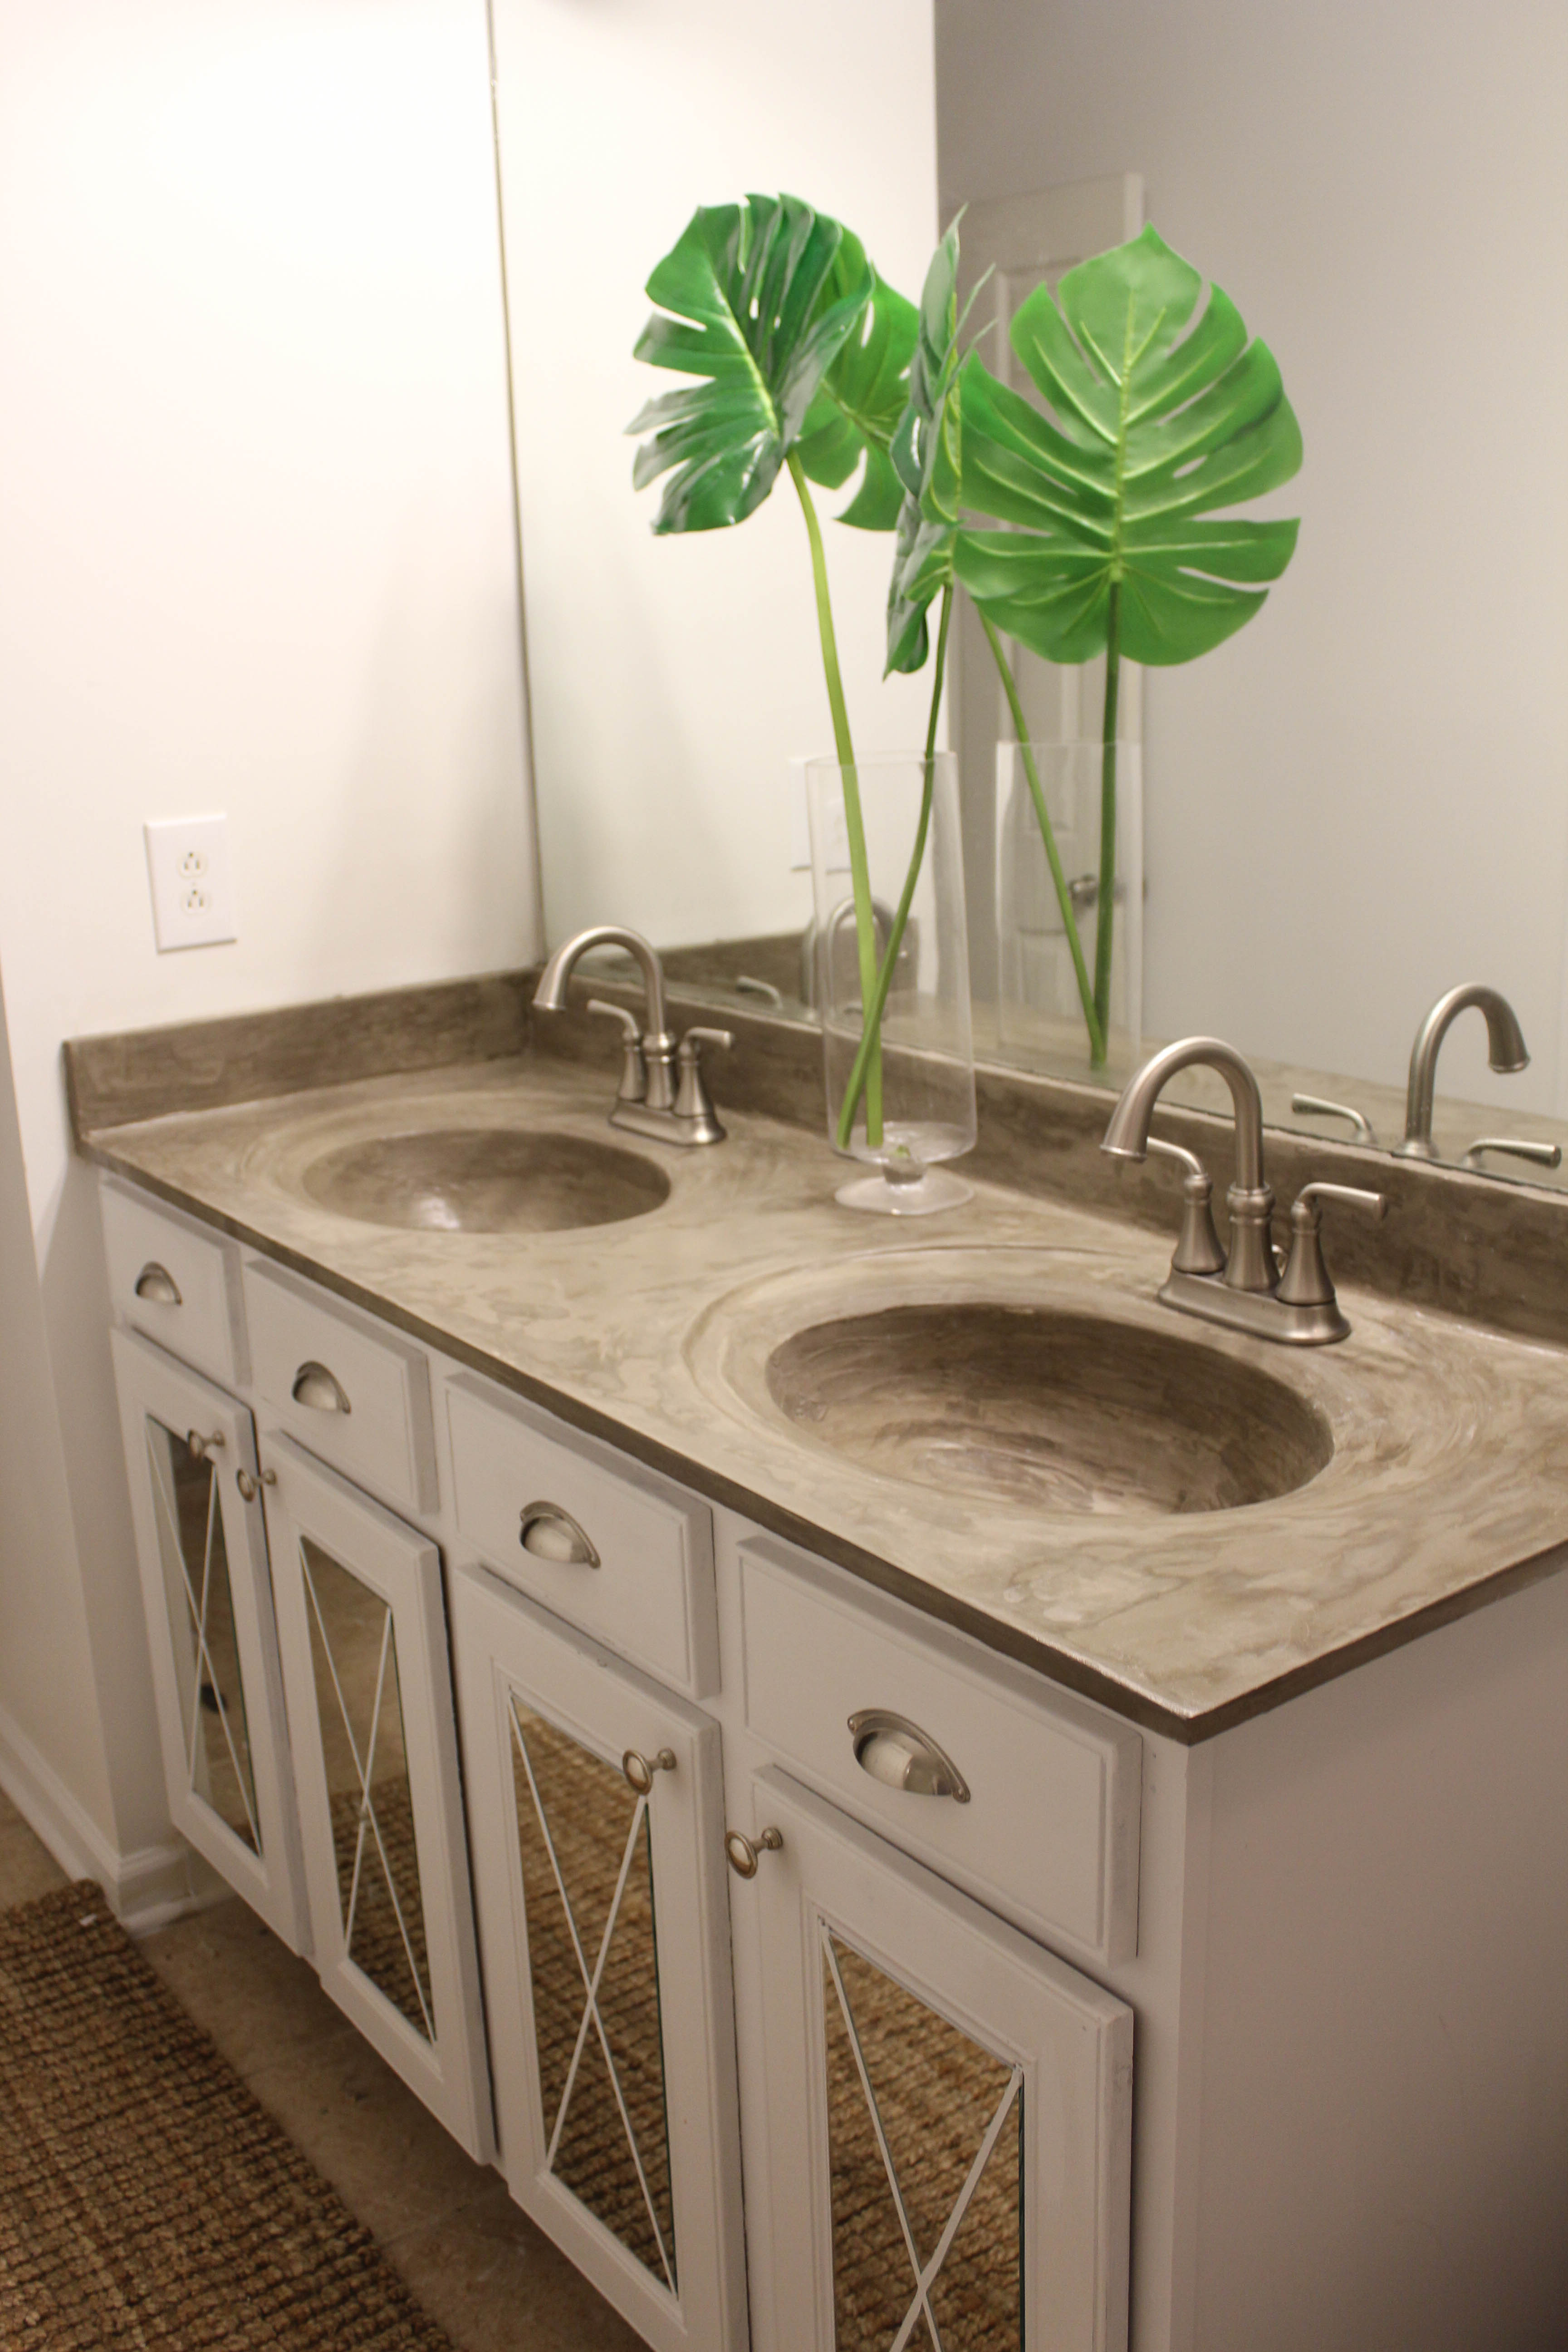 How to Install a Driftwood Frame Over Your Builder Basic Bathroom